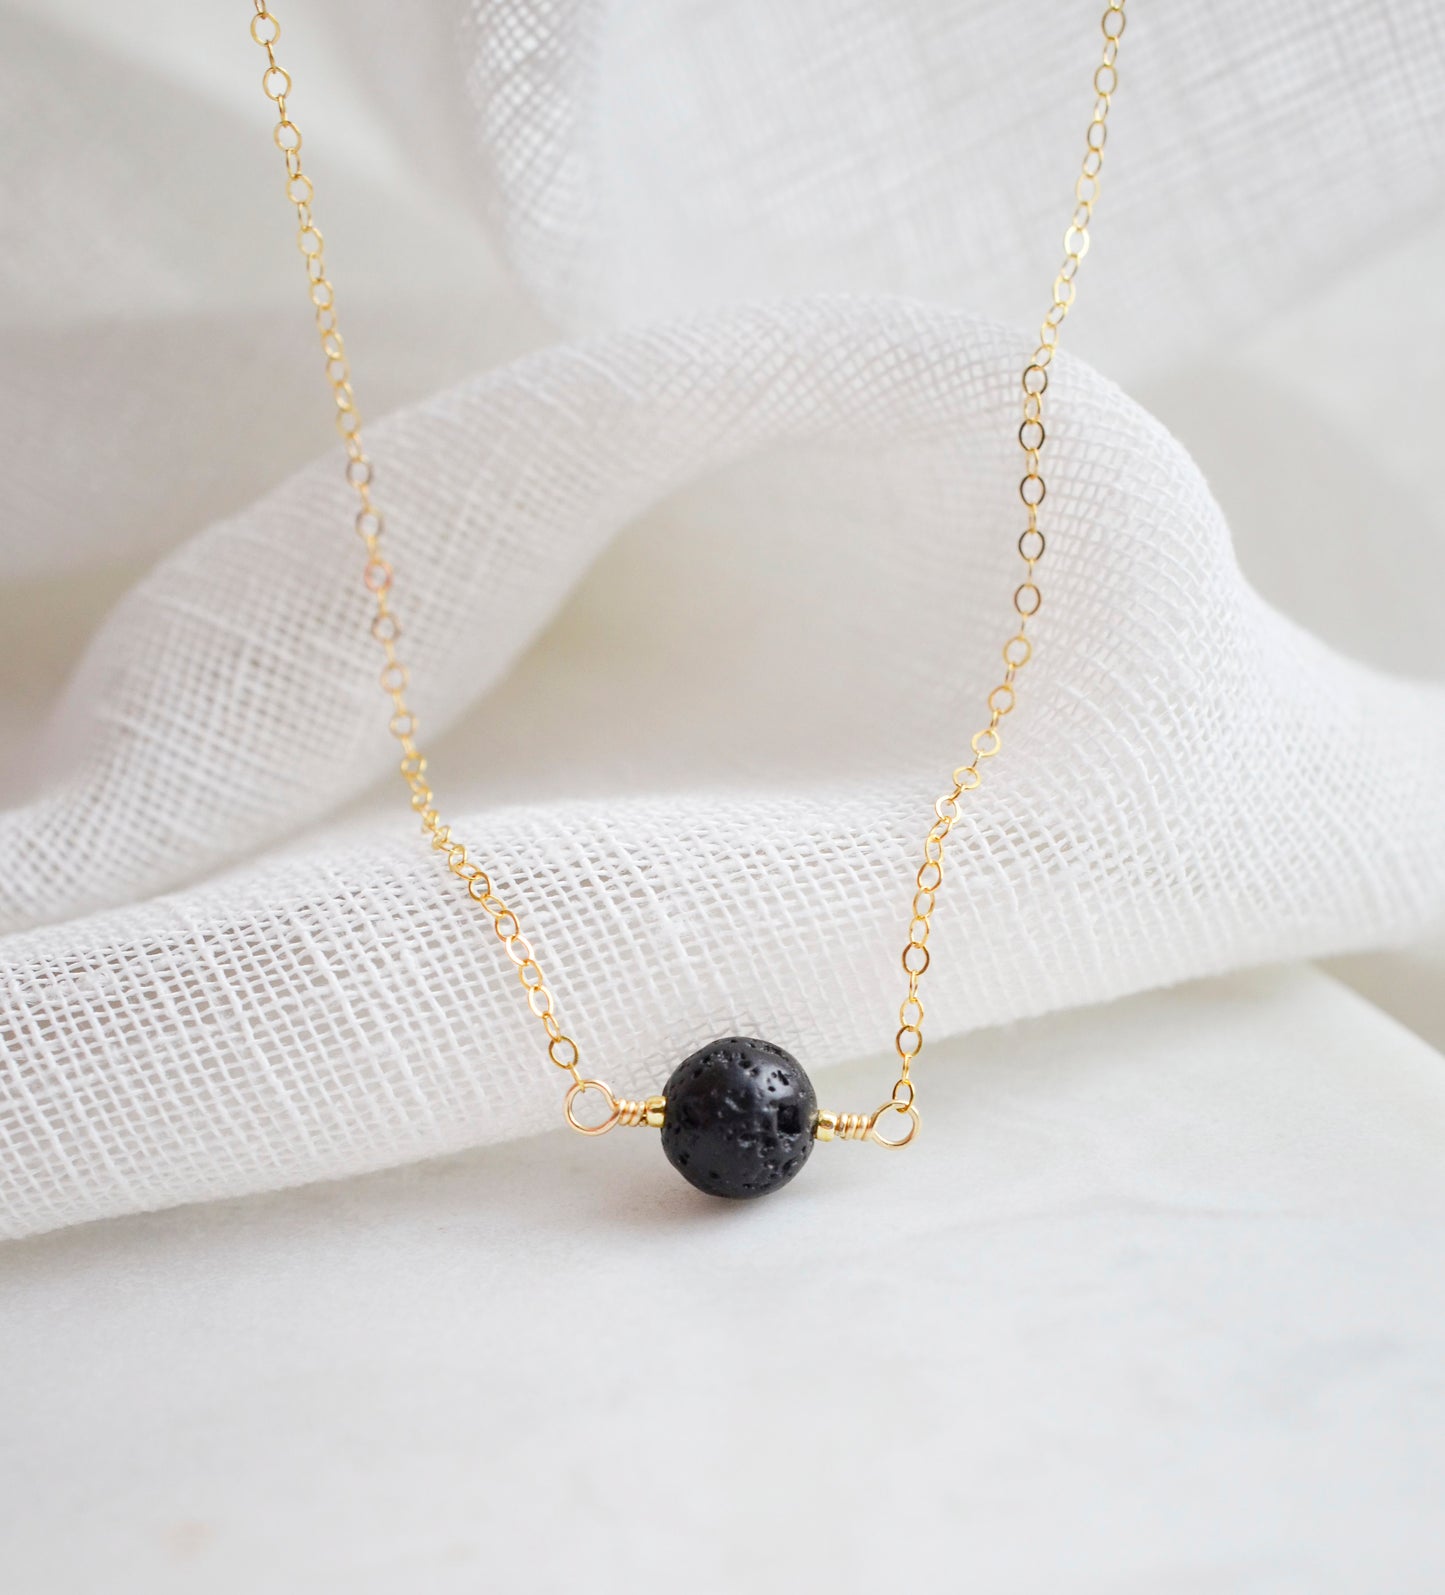 Close up image of a black Lava stone set onto a 14k gold filled chain. The stone is round with an irregular surface. 